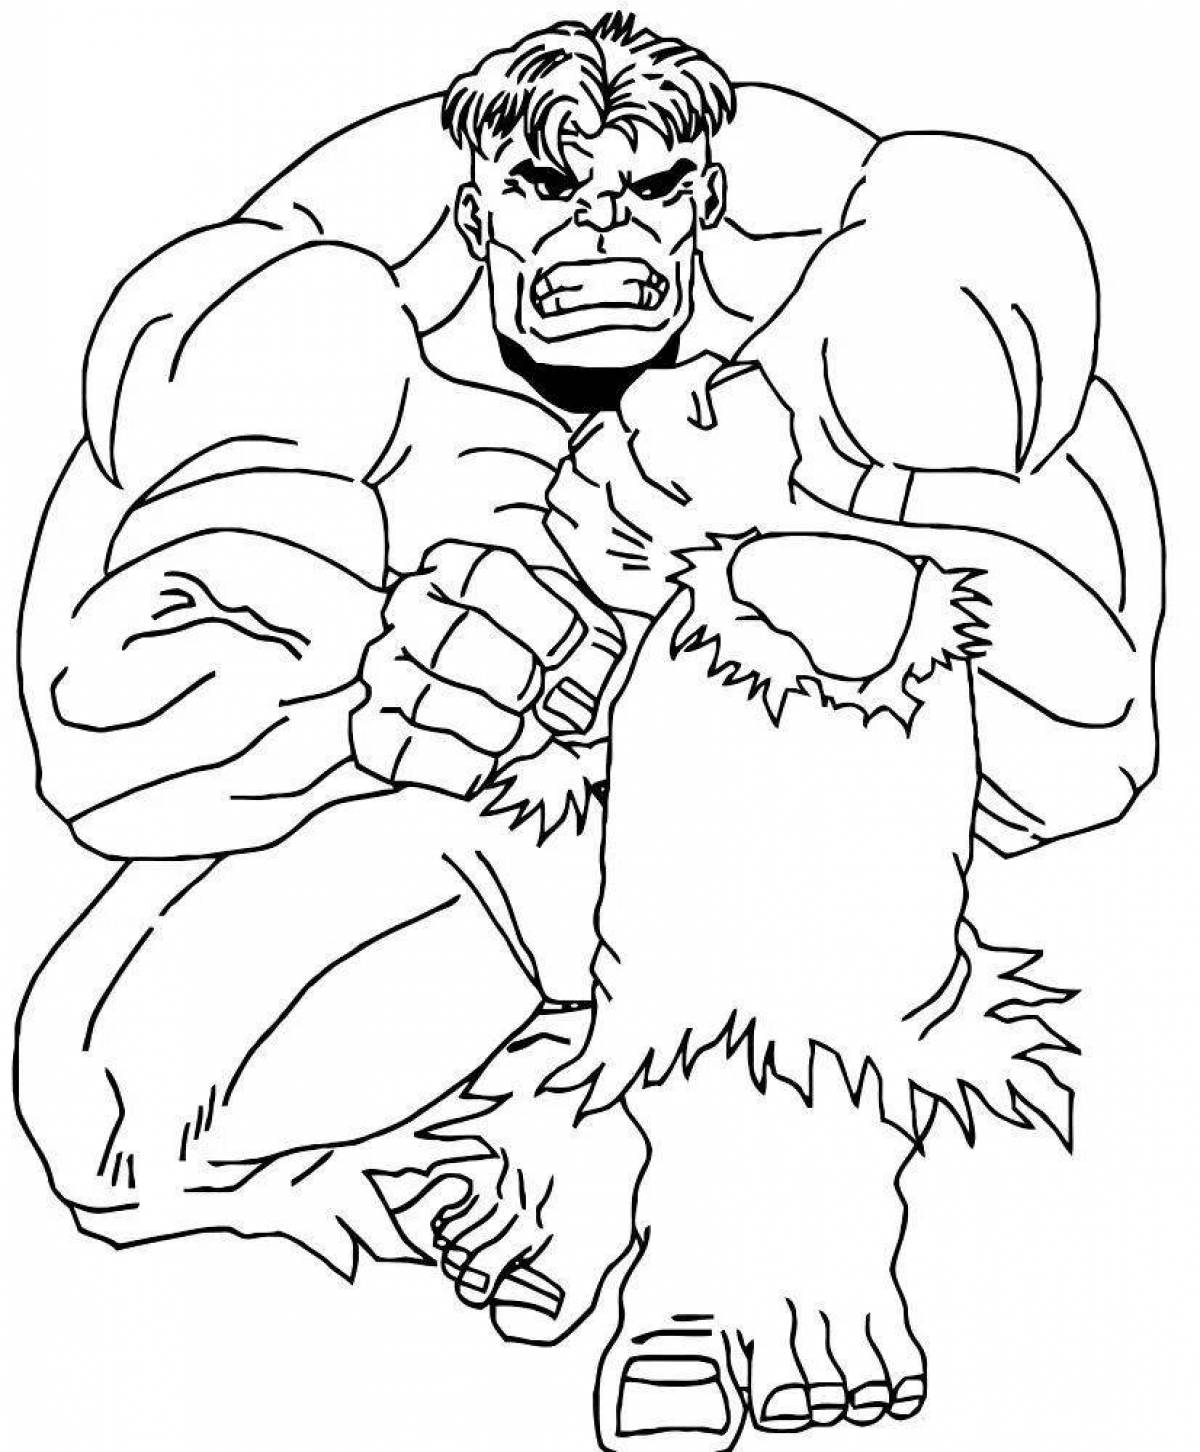 Colorfully detailed hulk coloring page